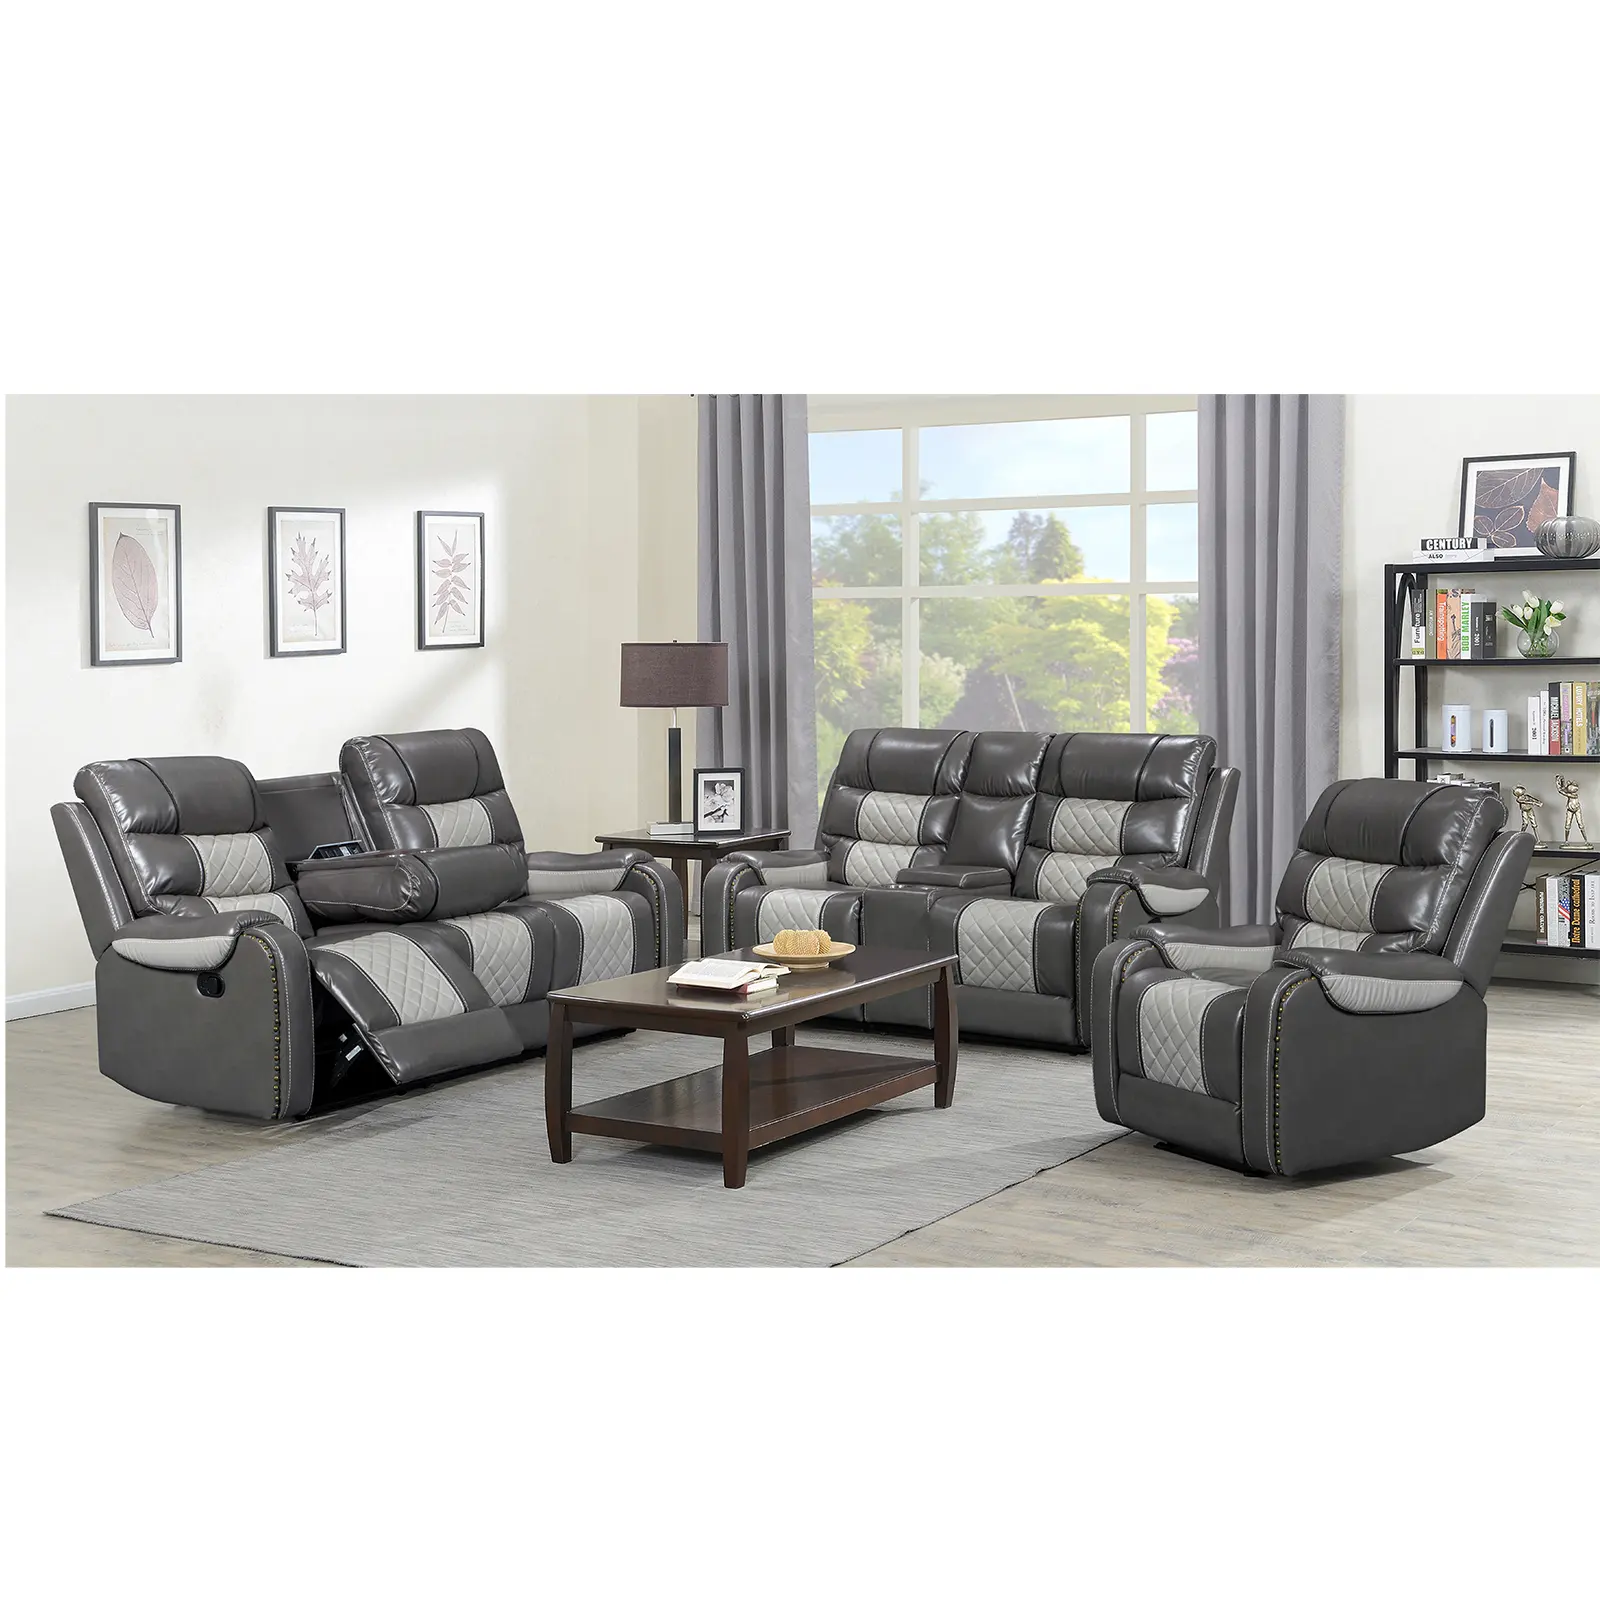 CY Luxury Leather Manual Electric Outlet and Cupholder Home Use Leather Recliner Sofa Set Reclinable for Living Room